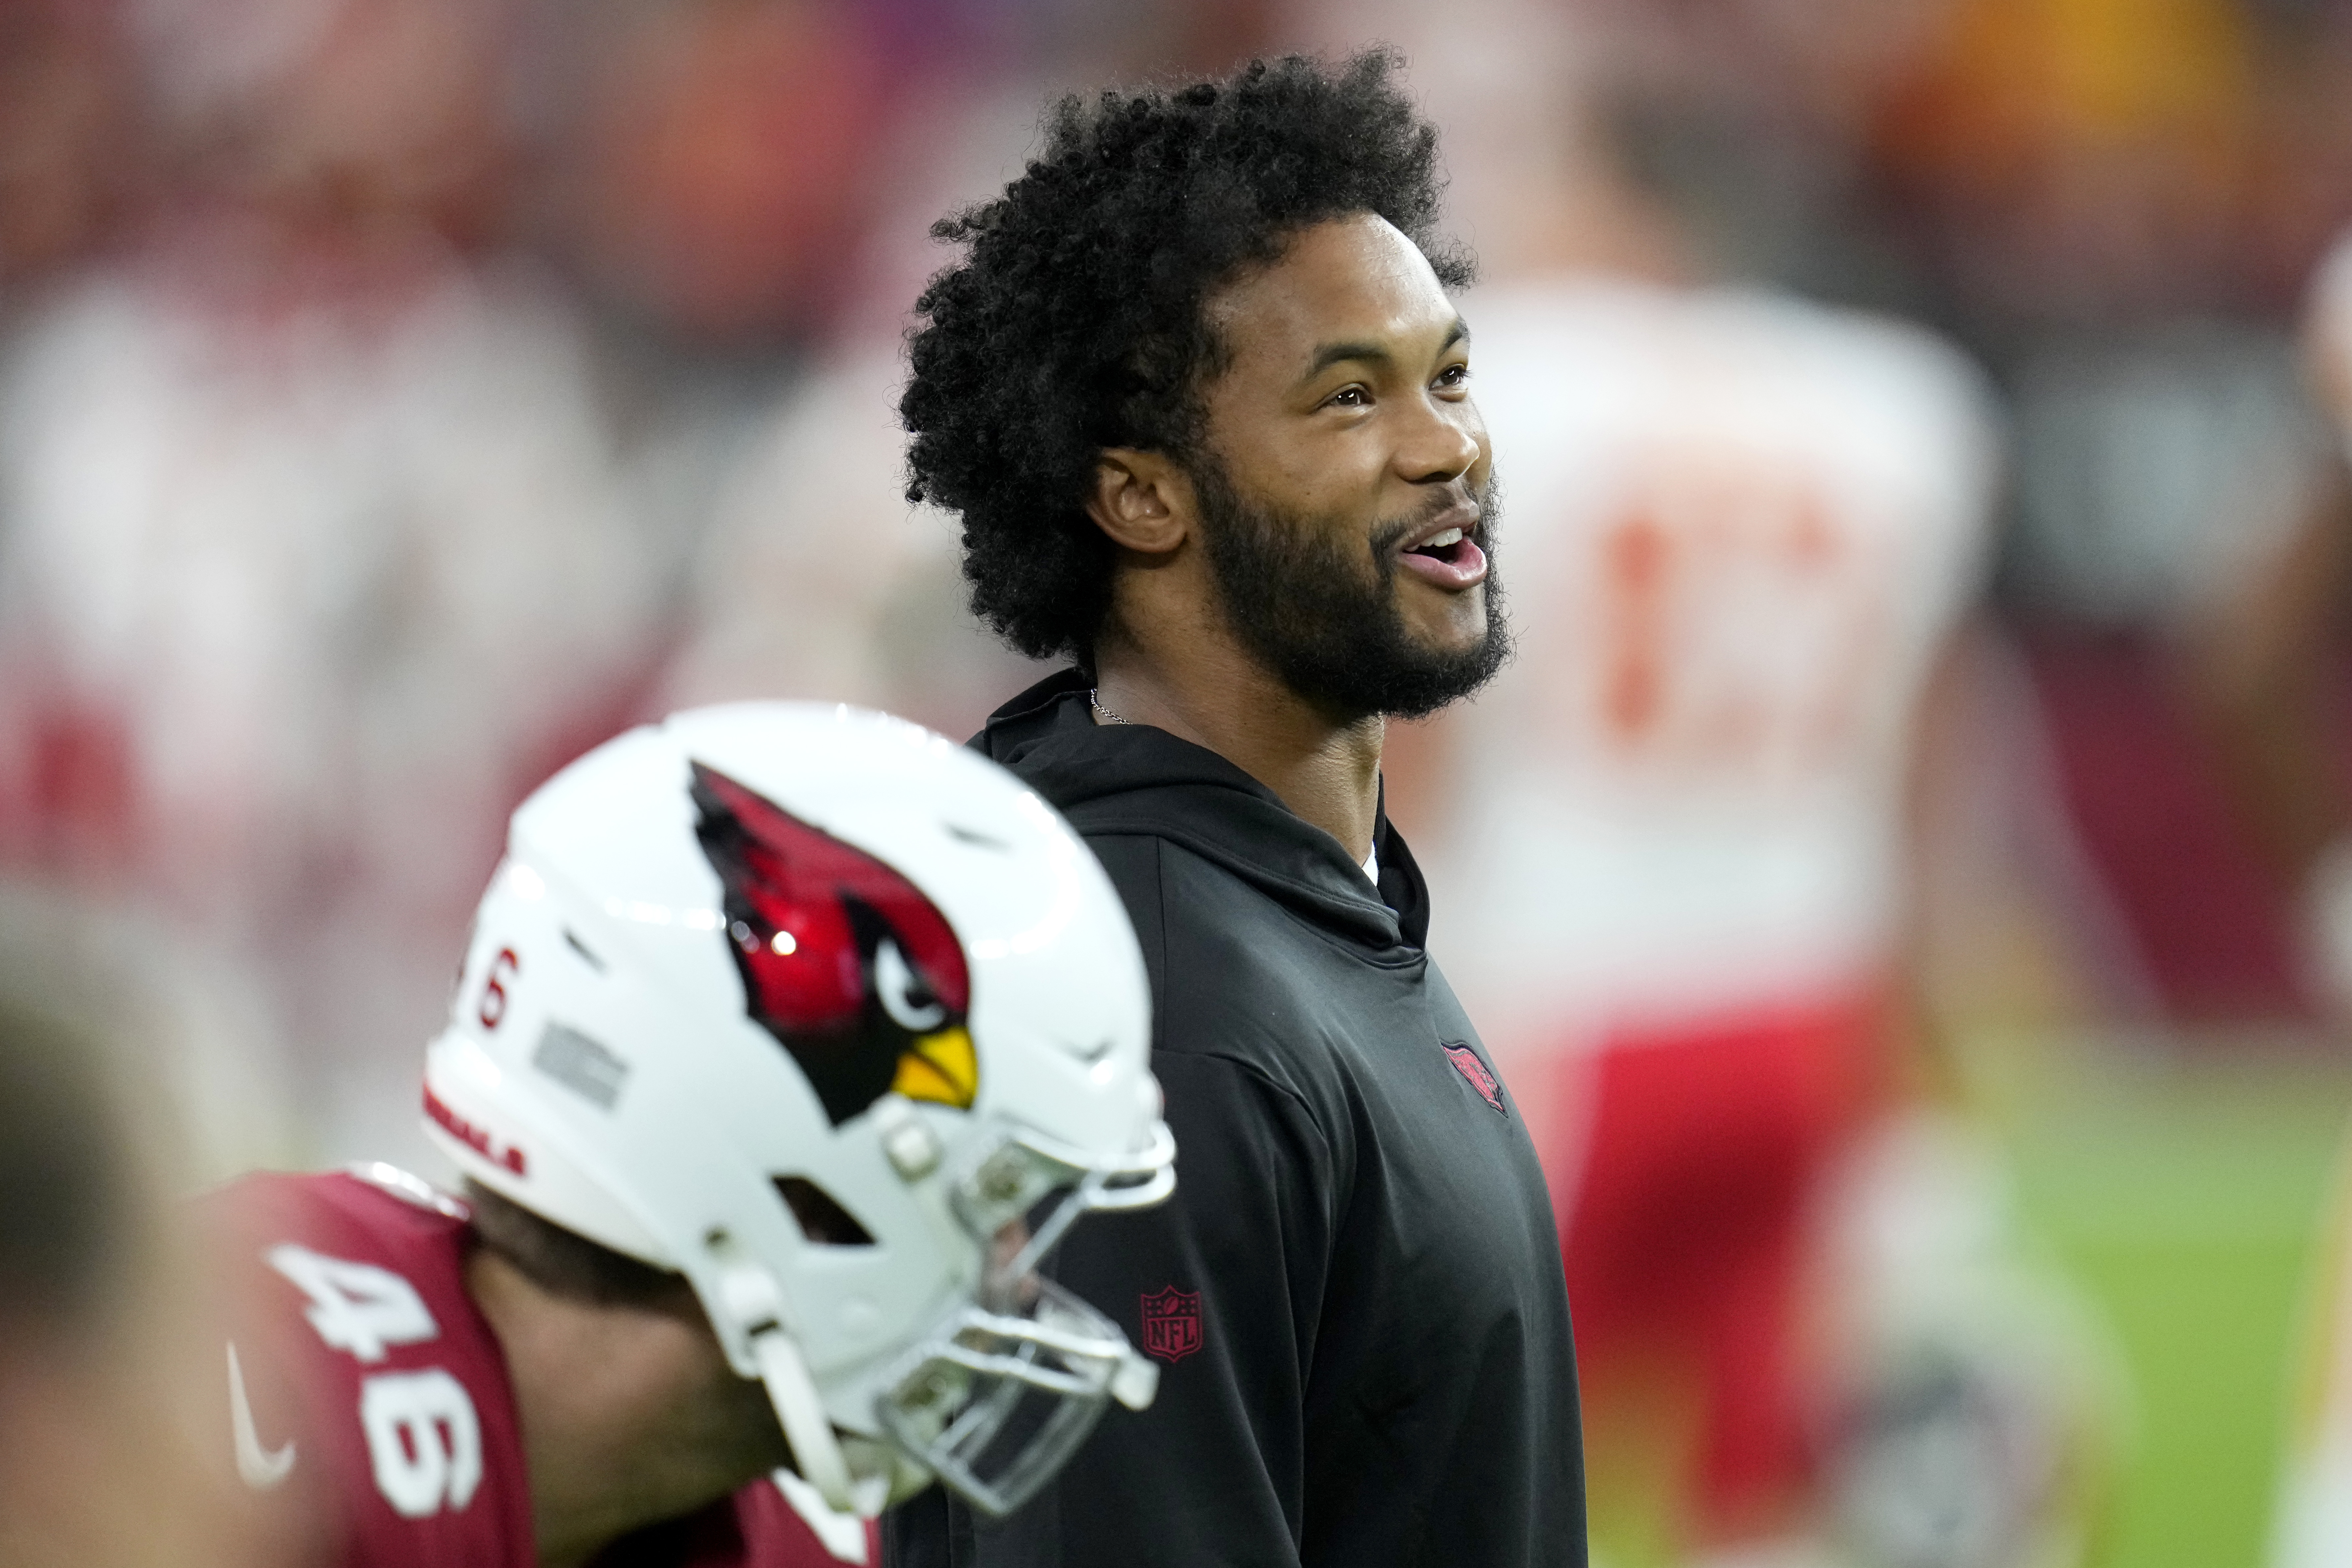 Arizona Cardinals might be struggling, but influx of rookies has surprised